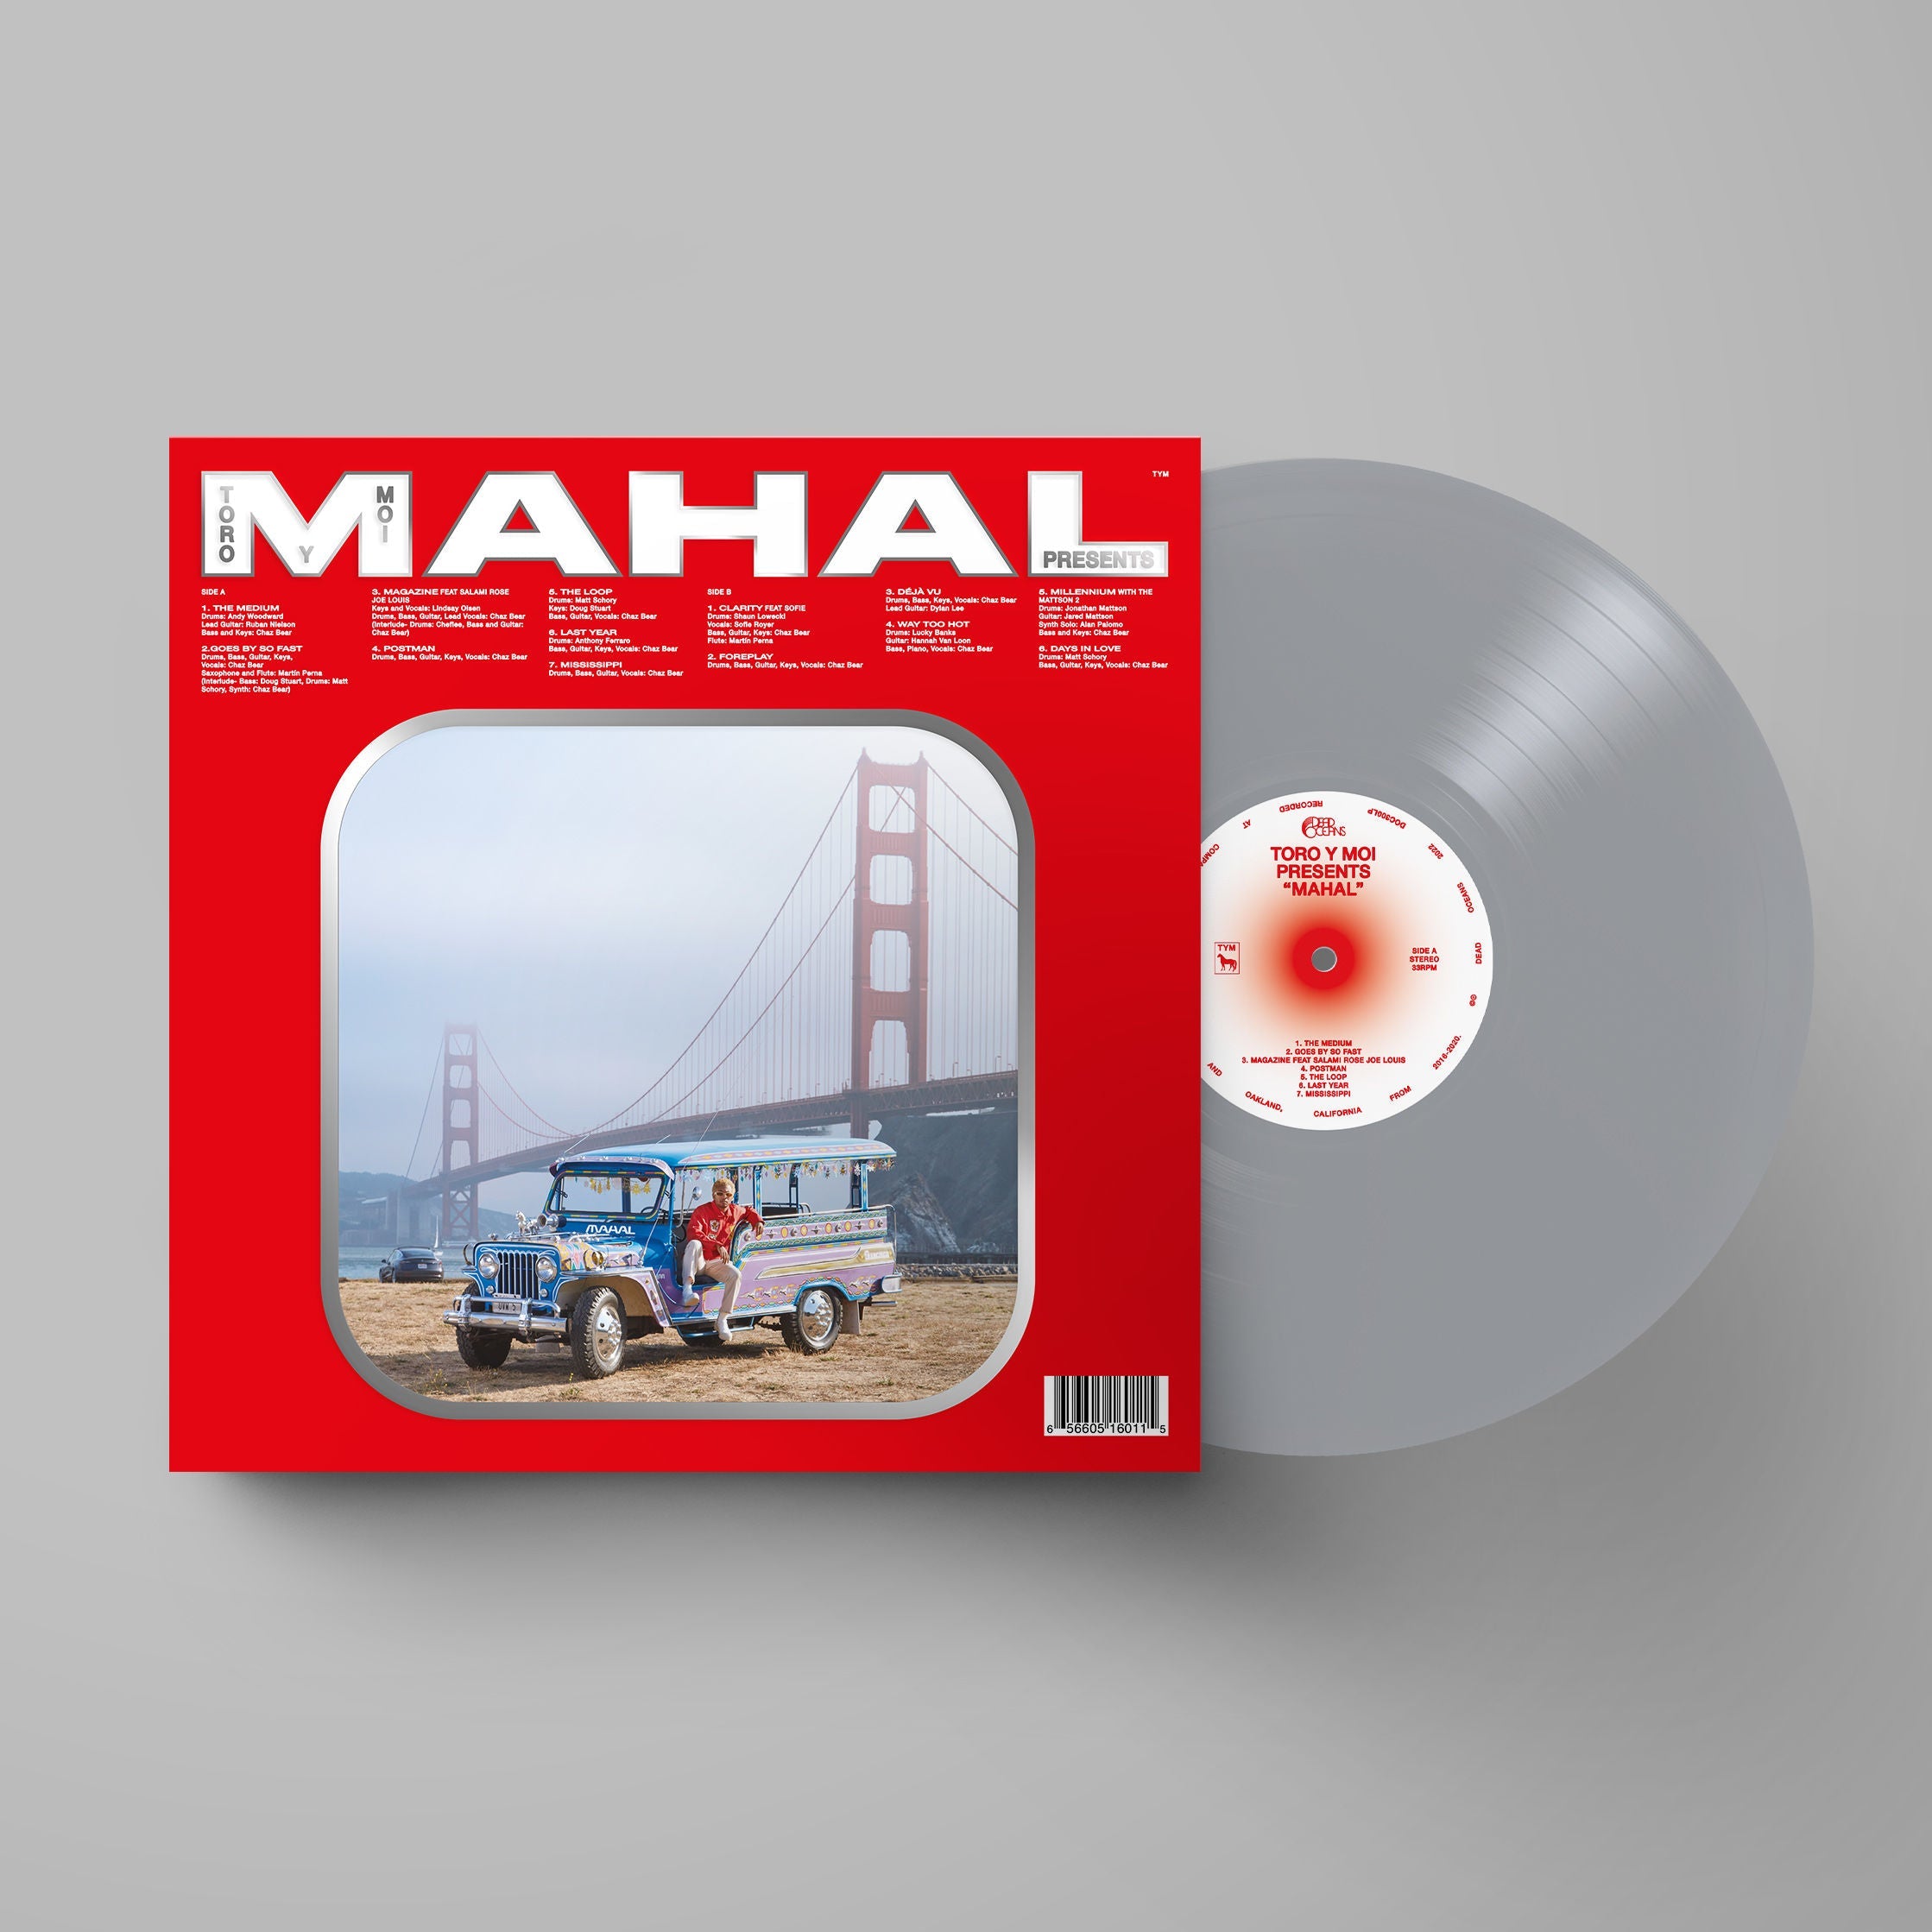 Mahal: Limited Edition Silver Vinyl LP + Signed Art Card